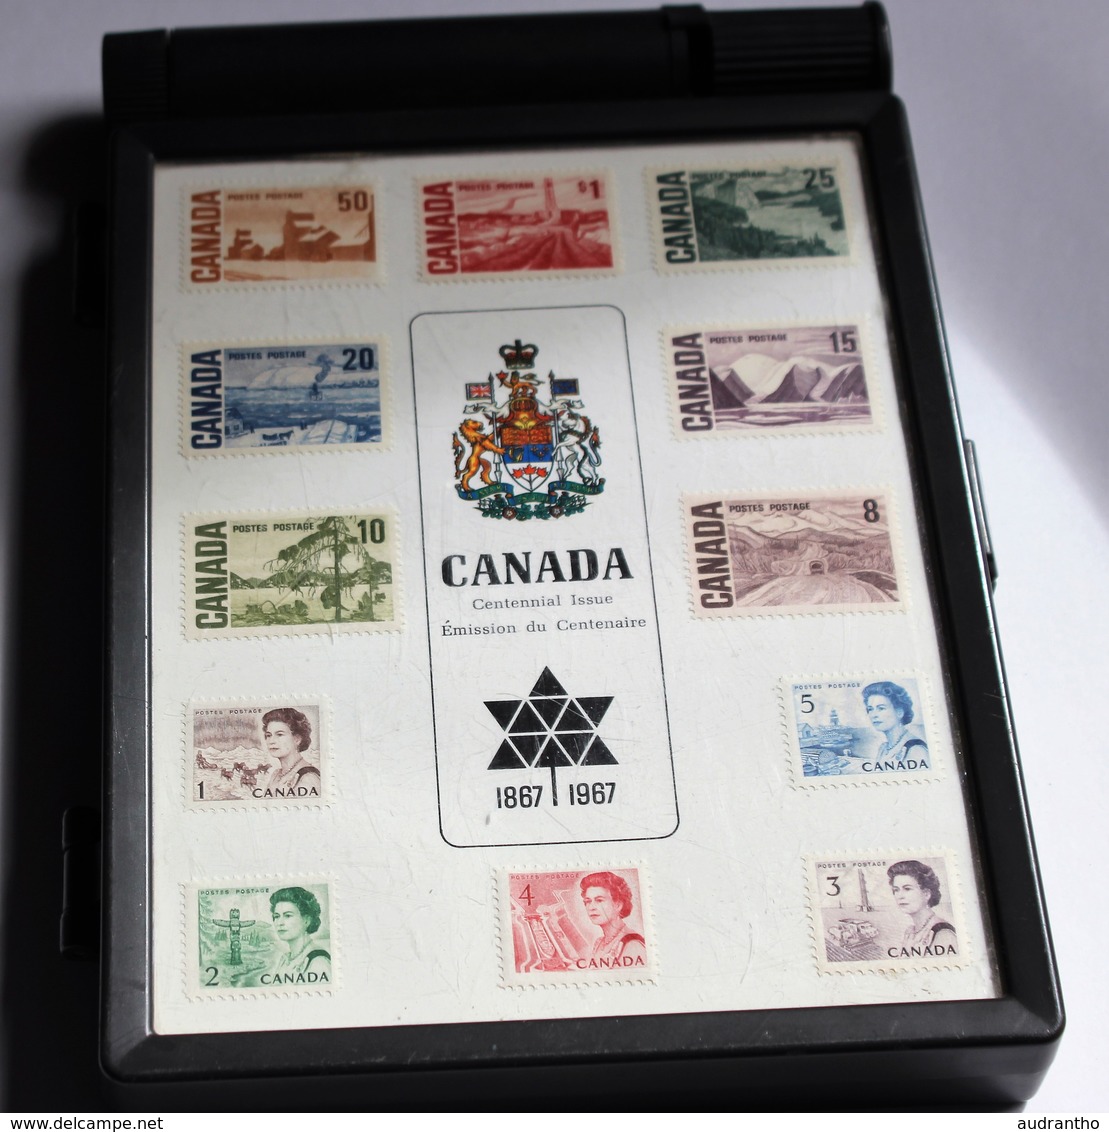 Timbres Canada Centennial Issue Emission Du Centenaire 1867 1967 Avec Boite By Air Mail Stamp Box - Histoire Postale